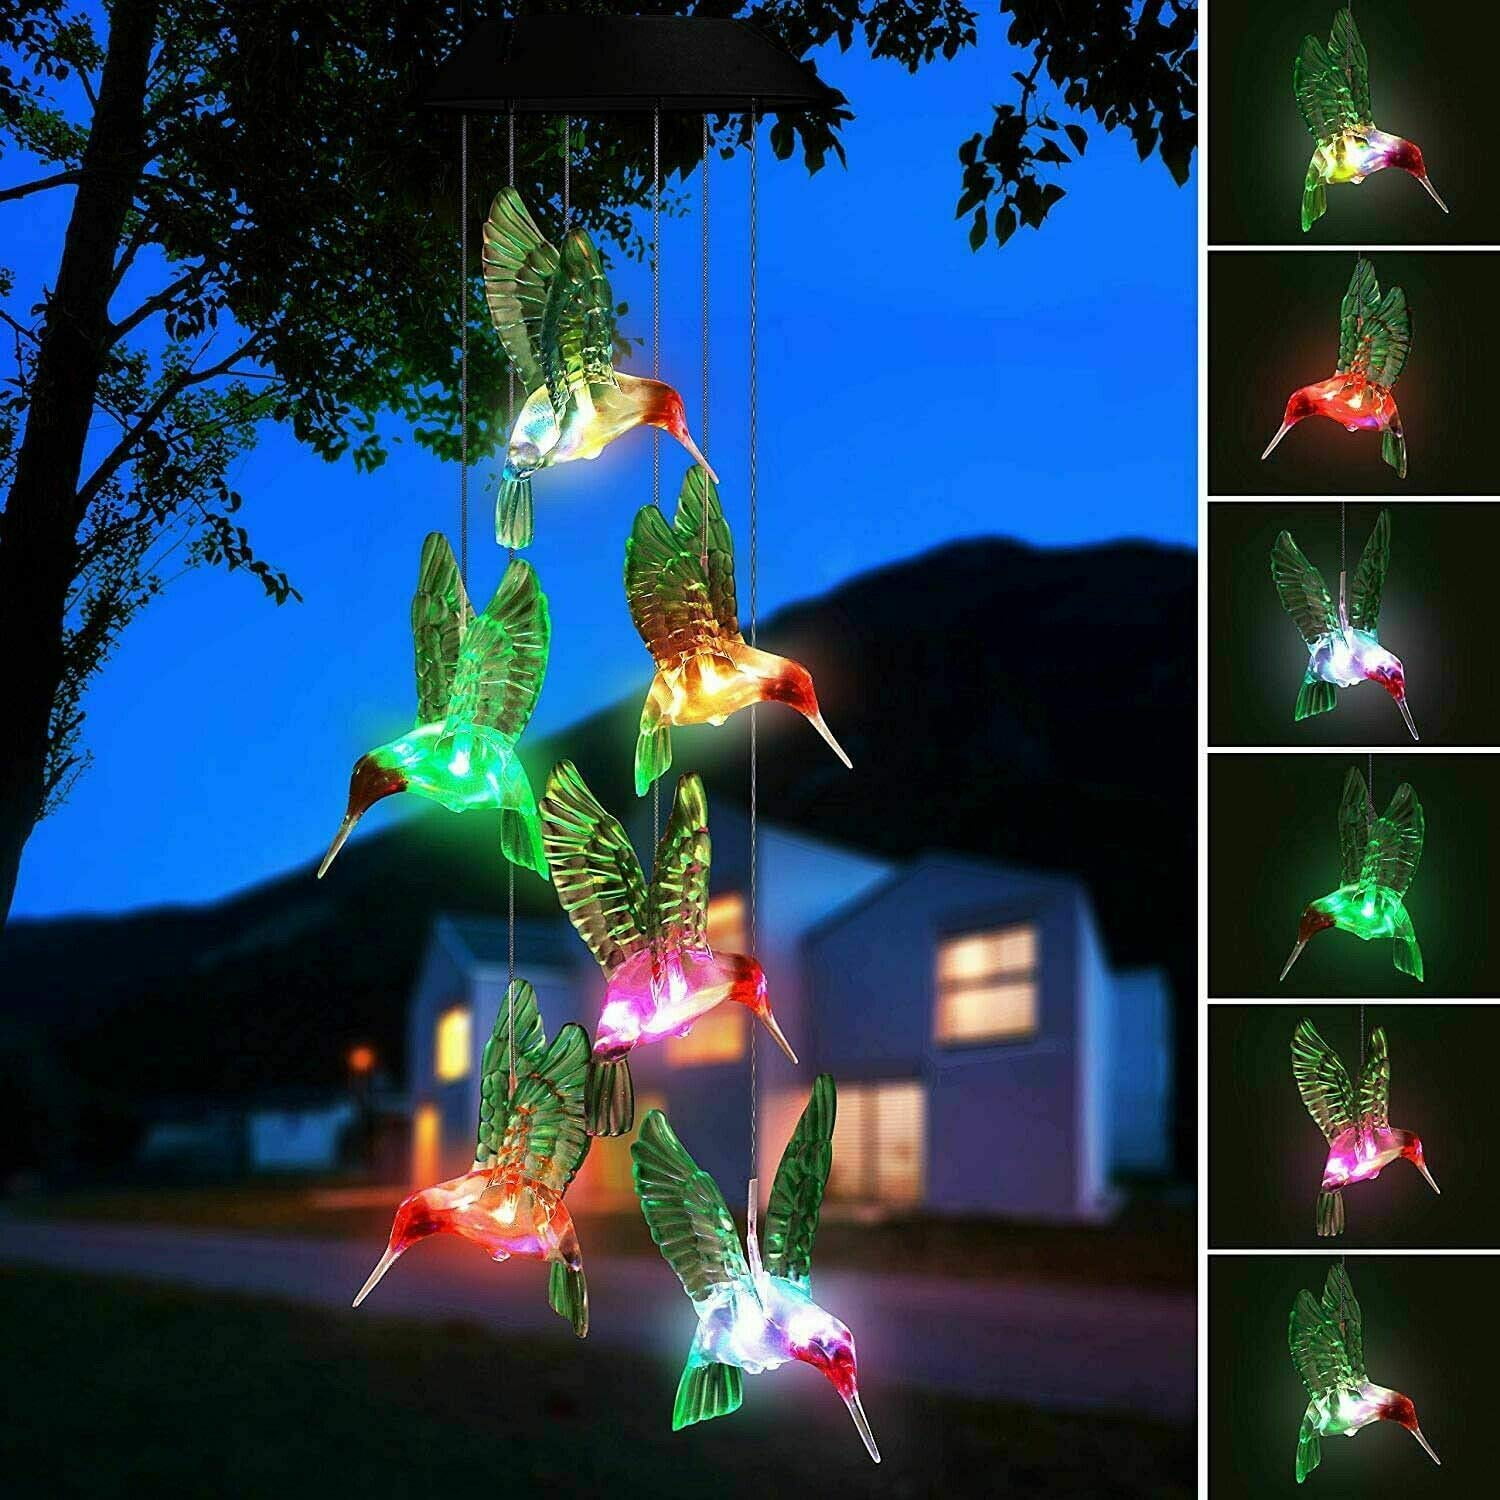 Solar Color Changing LED Wind Chime Garden Yard Hanging Light Walkway Lamp Decor 